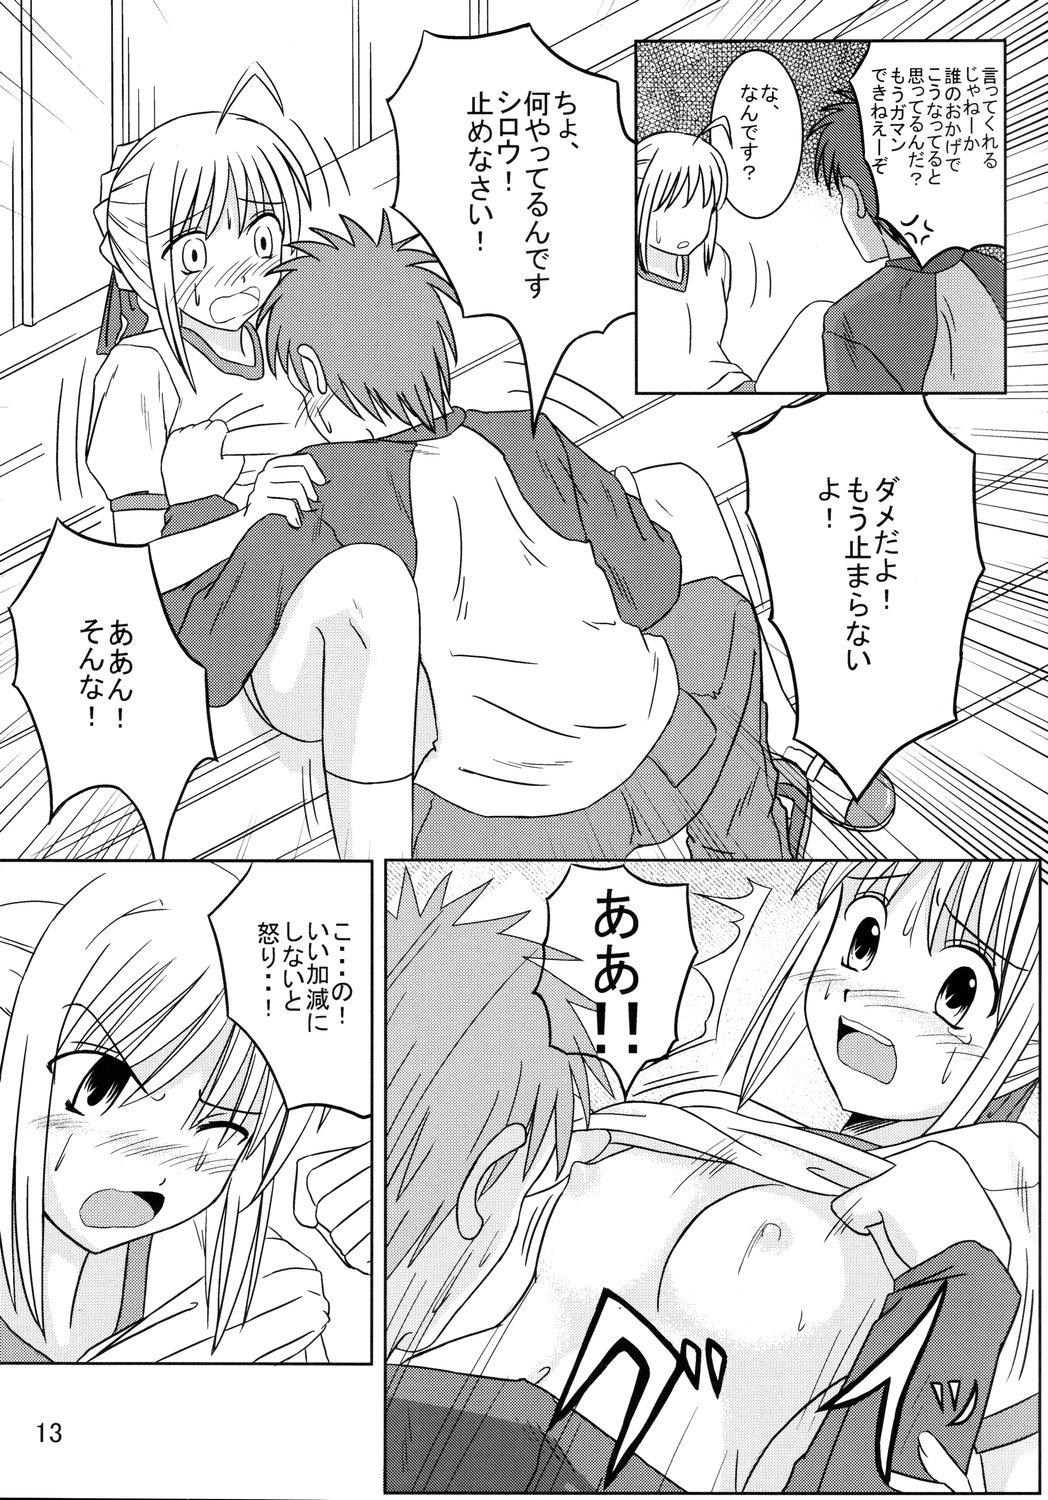 Uncensored Saber Of Sanity - Fate stay night Furry - Page 12